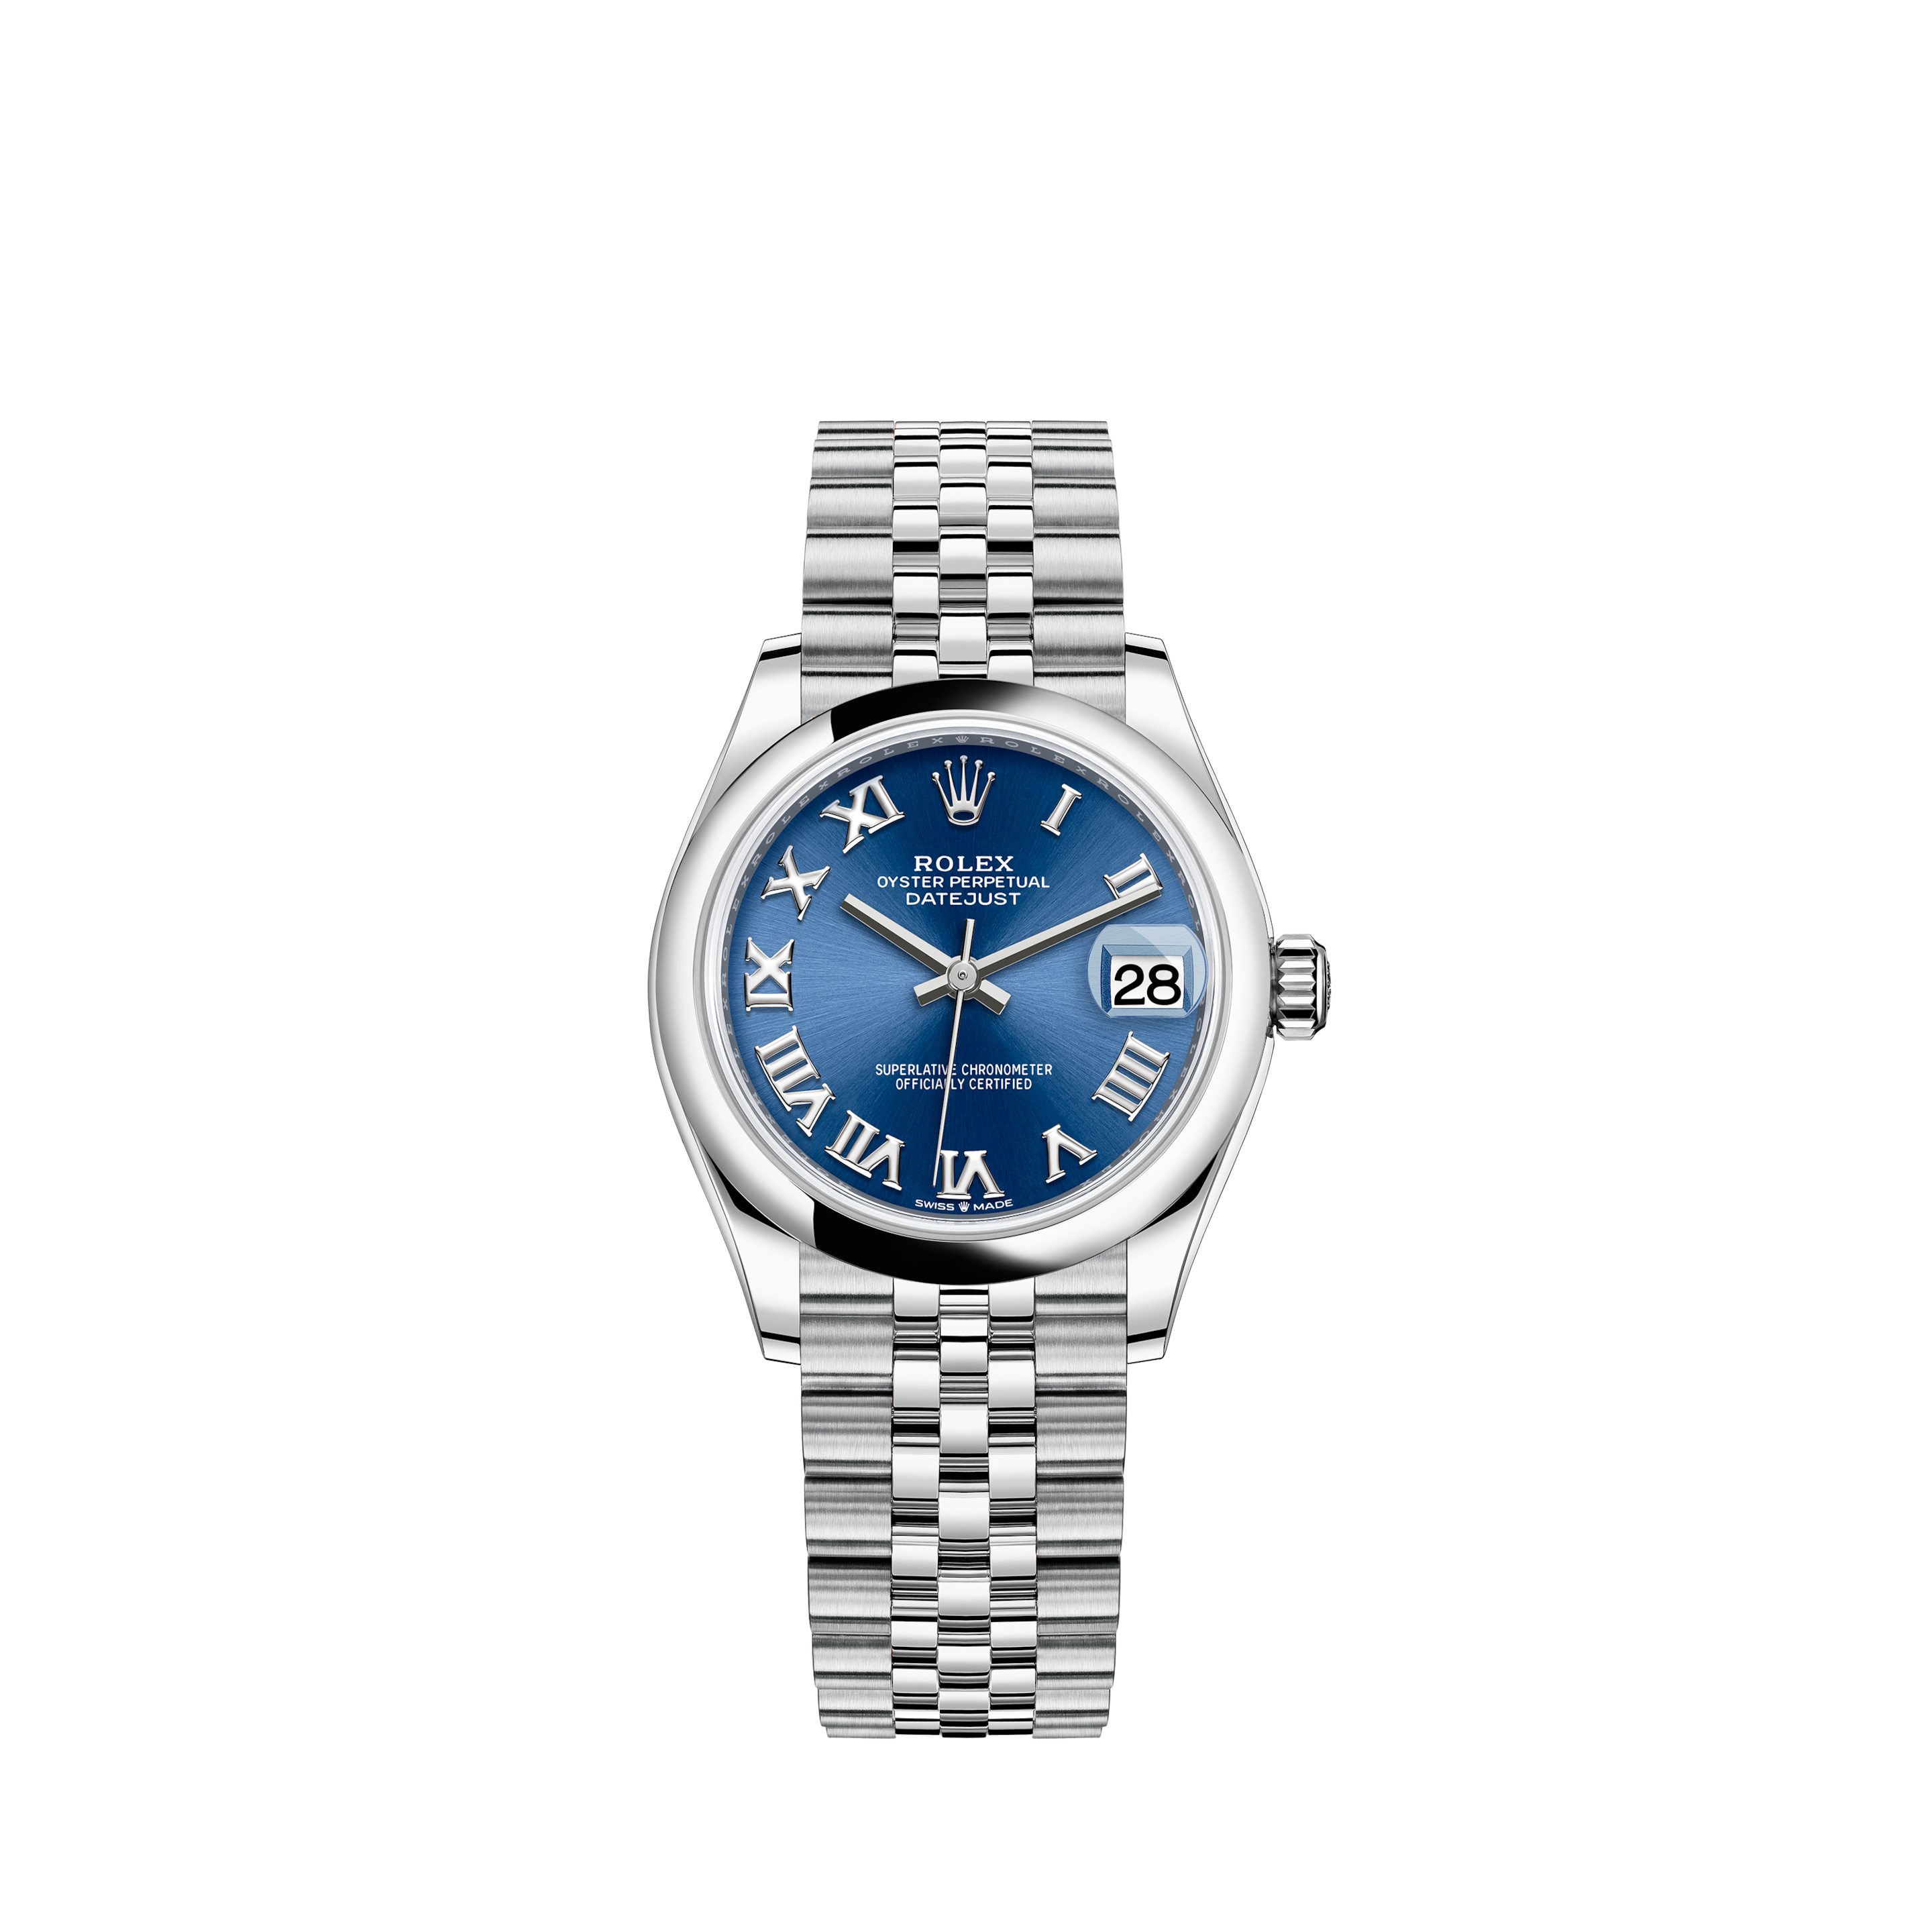 Rolex [204] E No. 1990-1991 Manufactured PRODUCT ROLEX Rolex Datejust 69174 Blue Roman Dial WG/SS White Gold/Stainless Automatic Old Women's Watch Watch